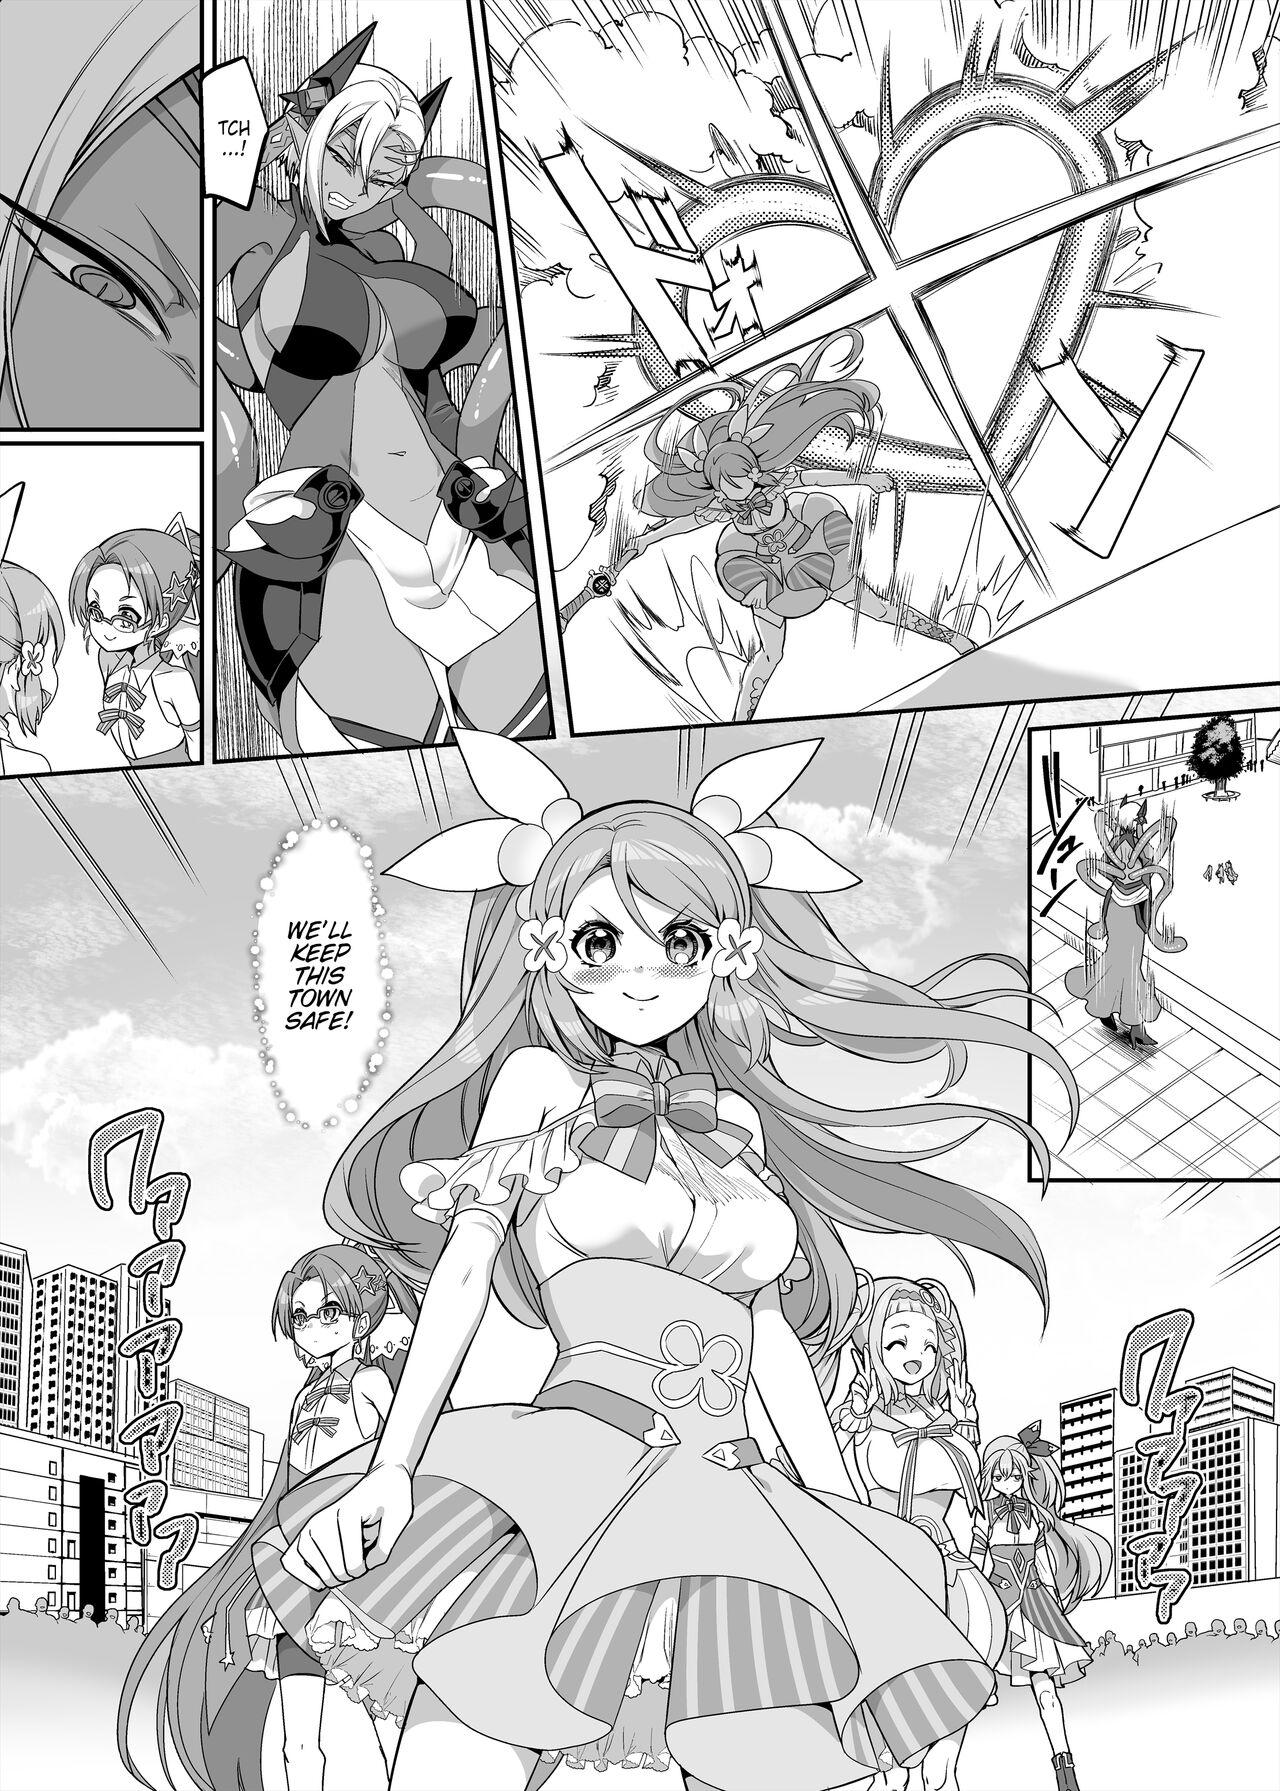 Perra Henshin Heroine Team no Zunouha de Majime de Hinnyuu no Blue | The Smart, Diligent and Flat-Chested Blue from the Team of Morphing Heroines - Original Pija - Page 3